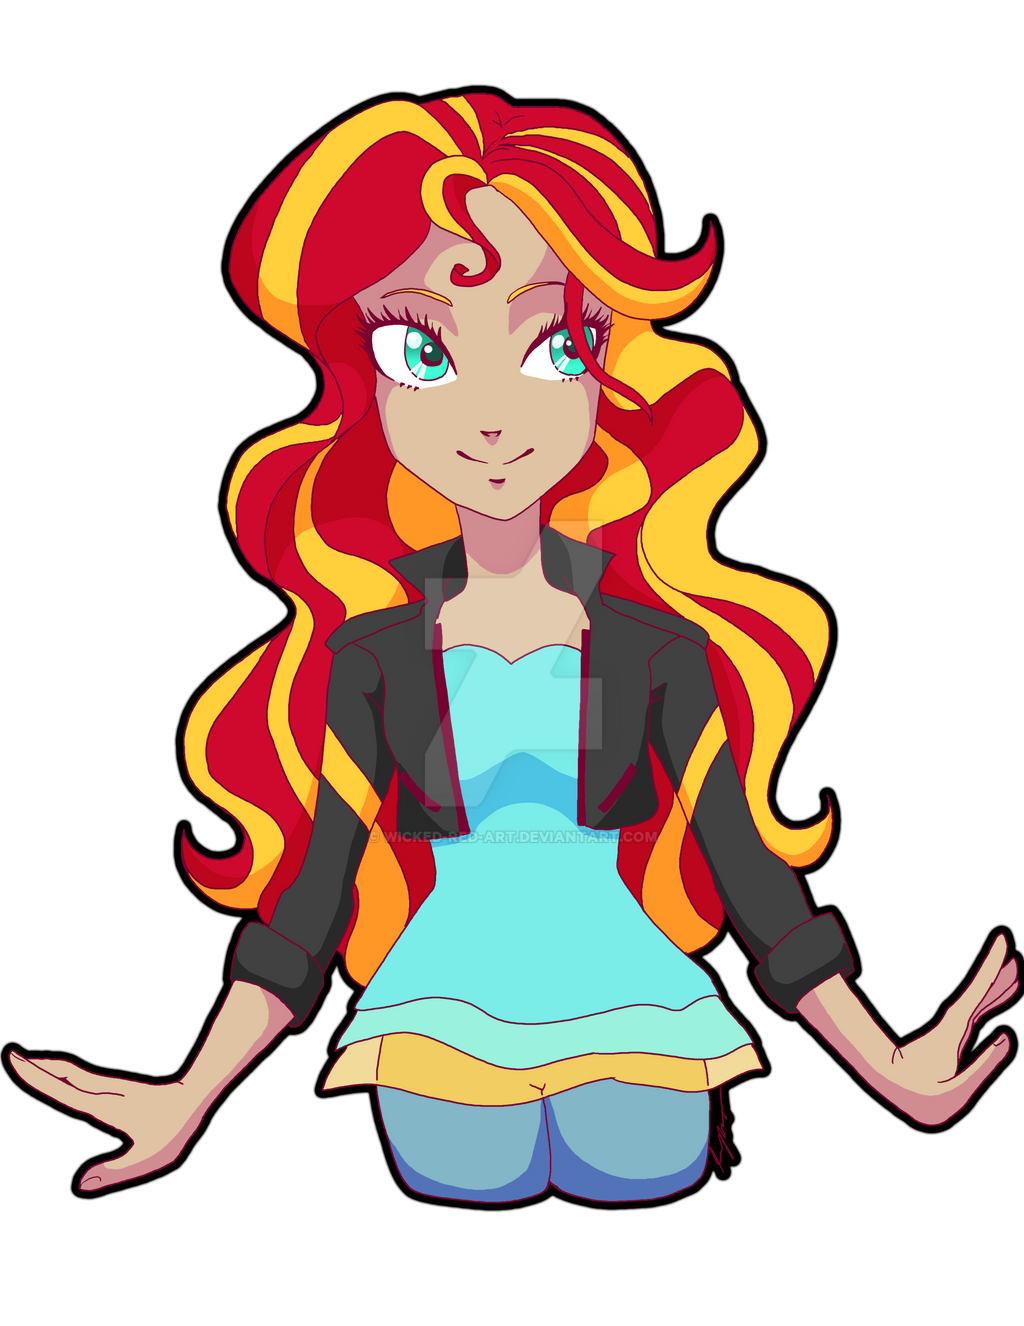 Sunset Shimmer by Wicked-RED-Art on DeviantArt